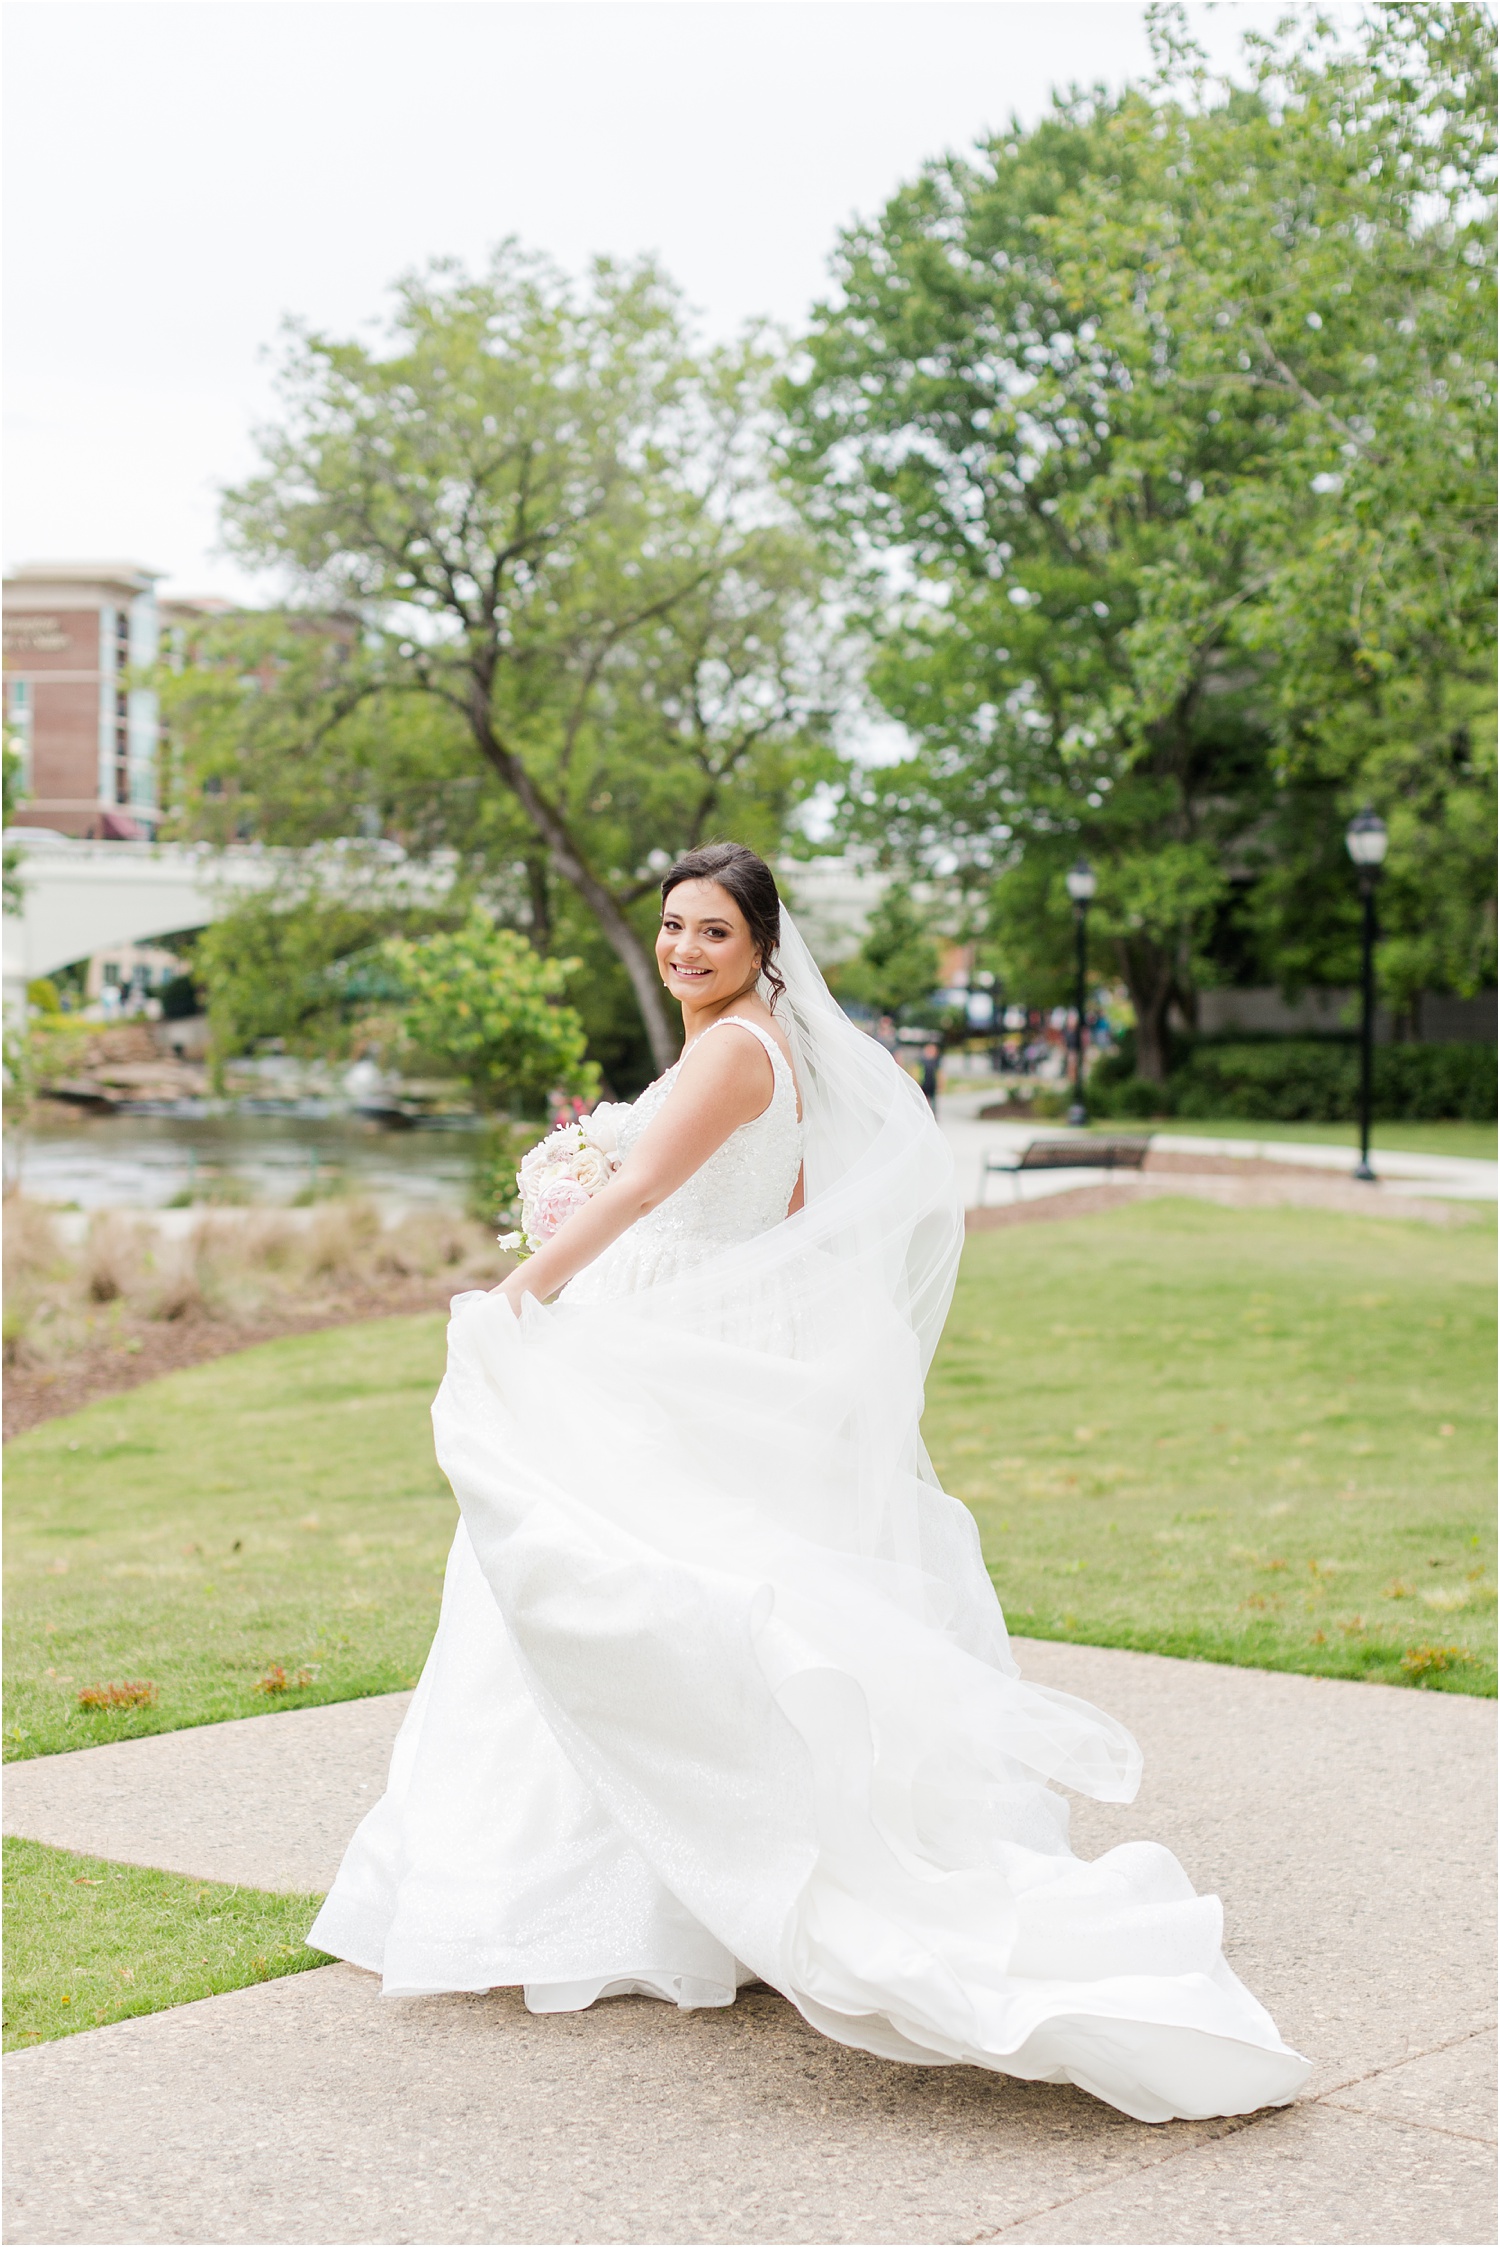 Indoor Wedding at The Huguenot Downtown Greenville